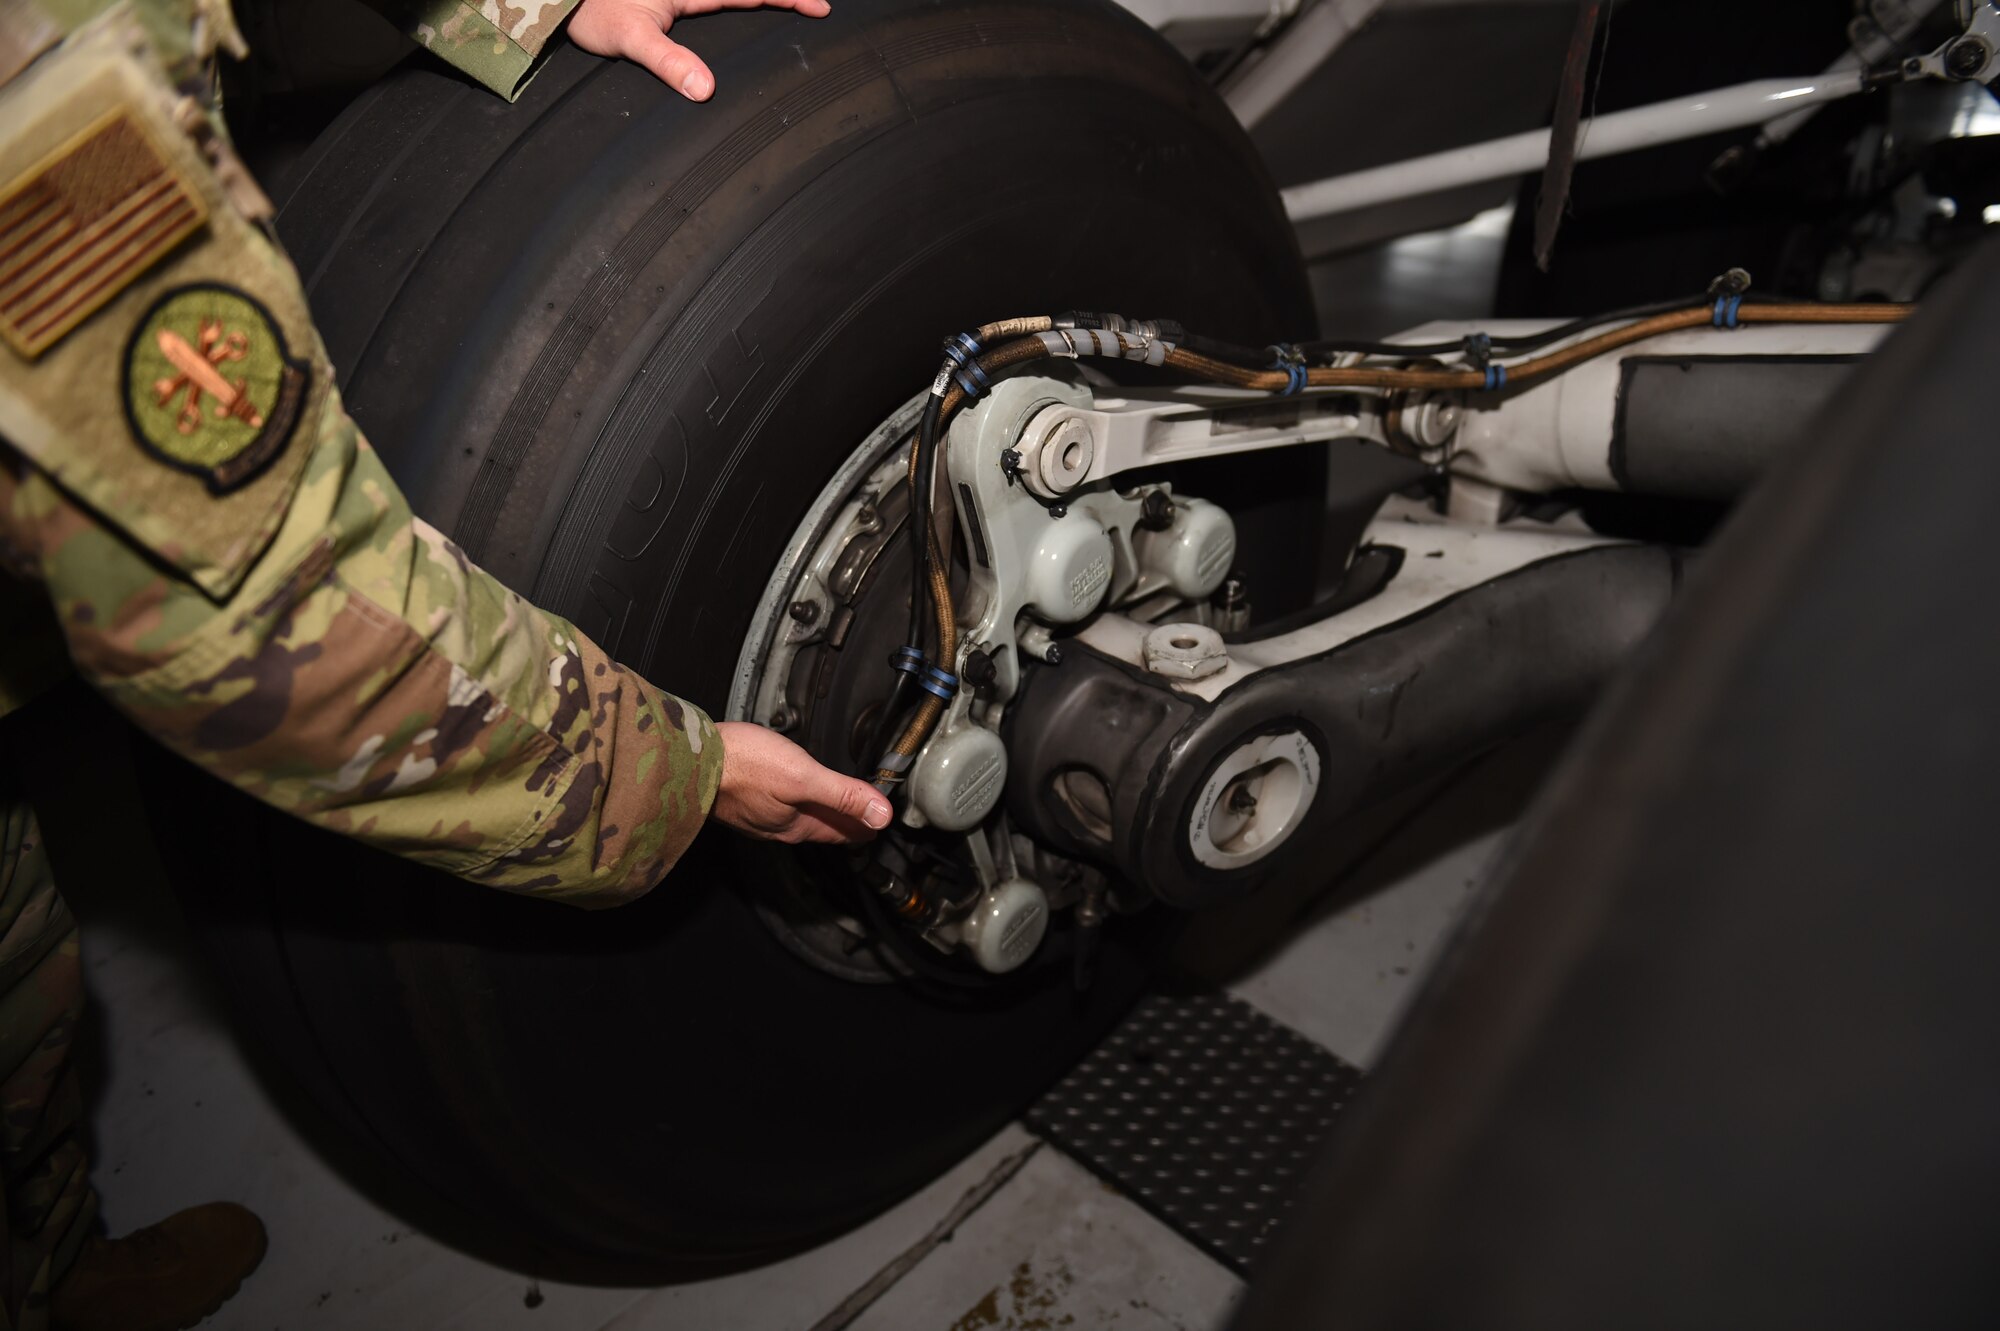 Master Sgt. Warren Hessler, 62nd MXS hydraulics section chief, points out the hydraulic hose on a C-17 Globemaster III brake system on Joint Base Lewis-McChord, Wash., Sept. 10, 2020. The hydraulics shop balances equipment maintenance and repair requests from multiple 62nd Maintenance Group agencies as well as other units and organizations. (U.S. Air Force photo by Airman 1st Class Mikayla Heineck)